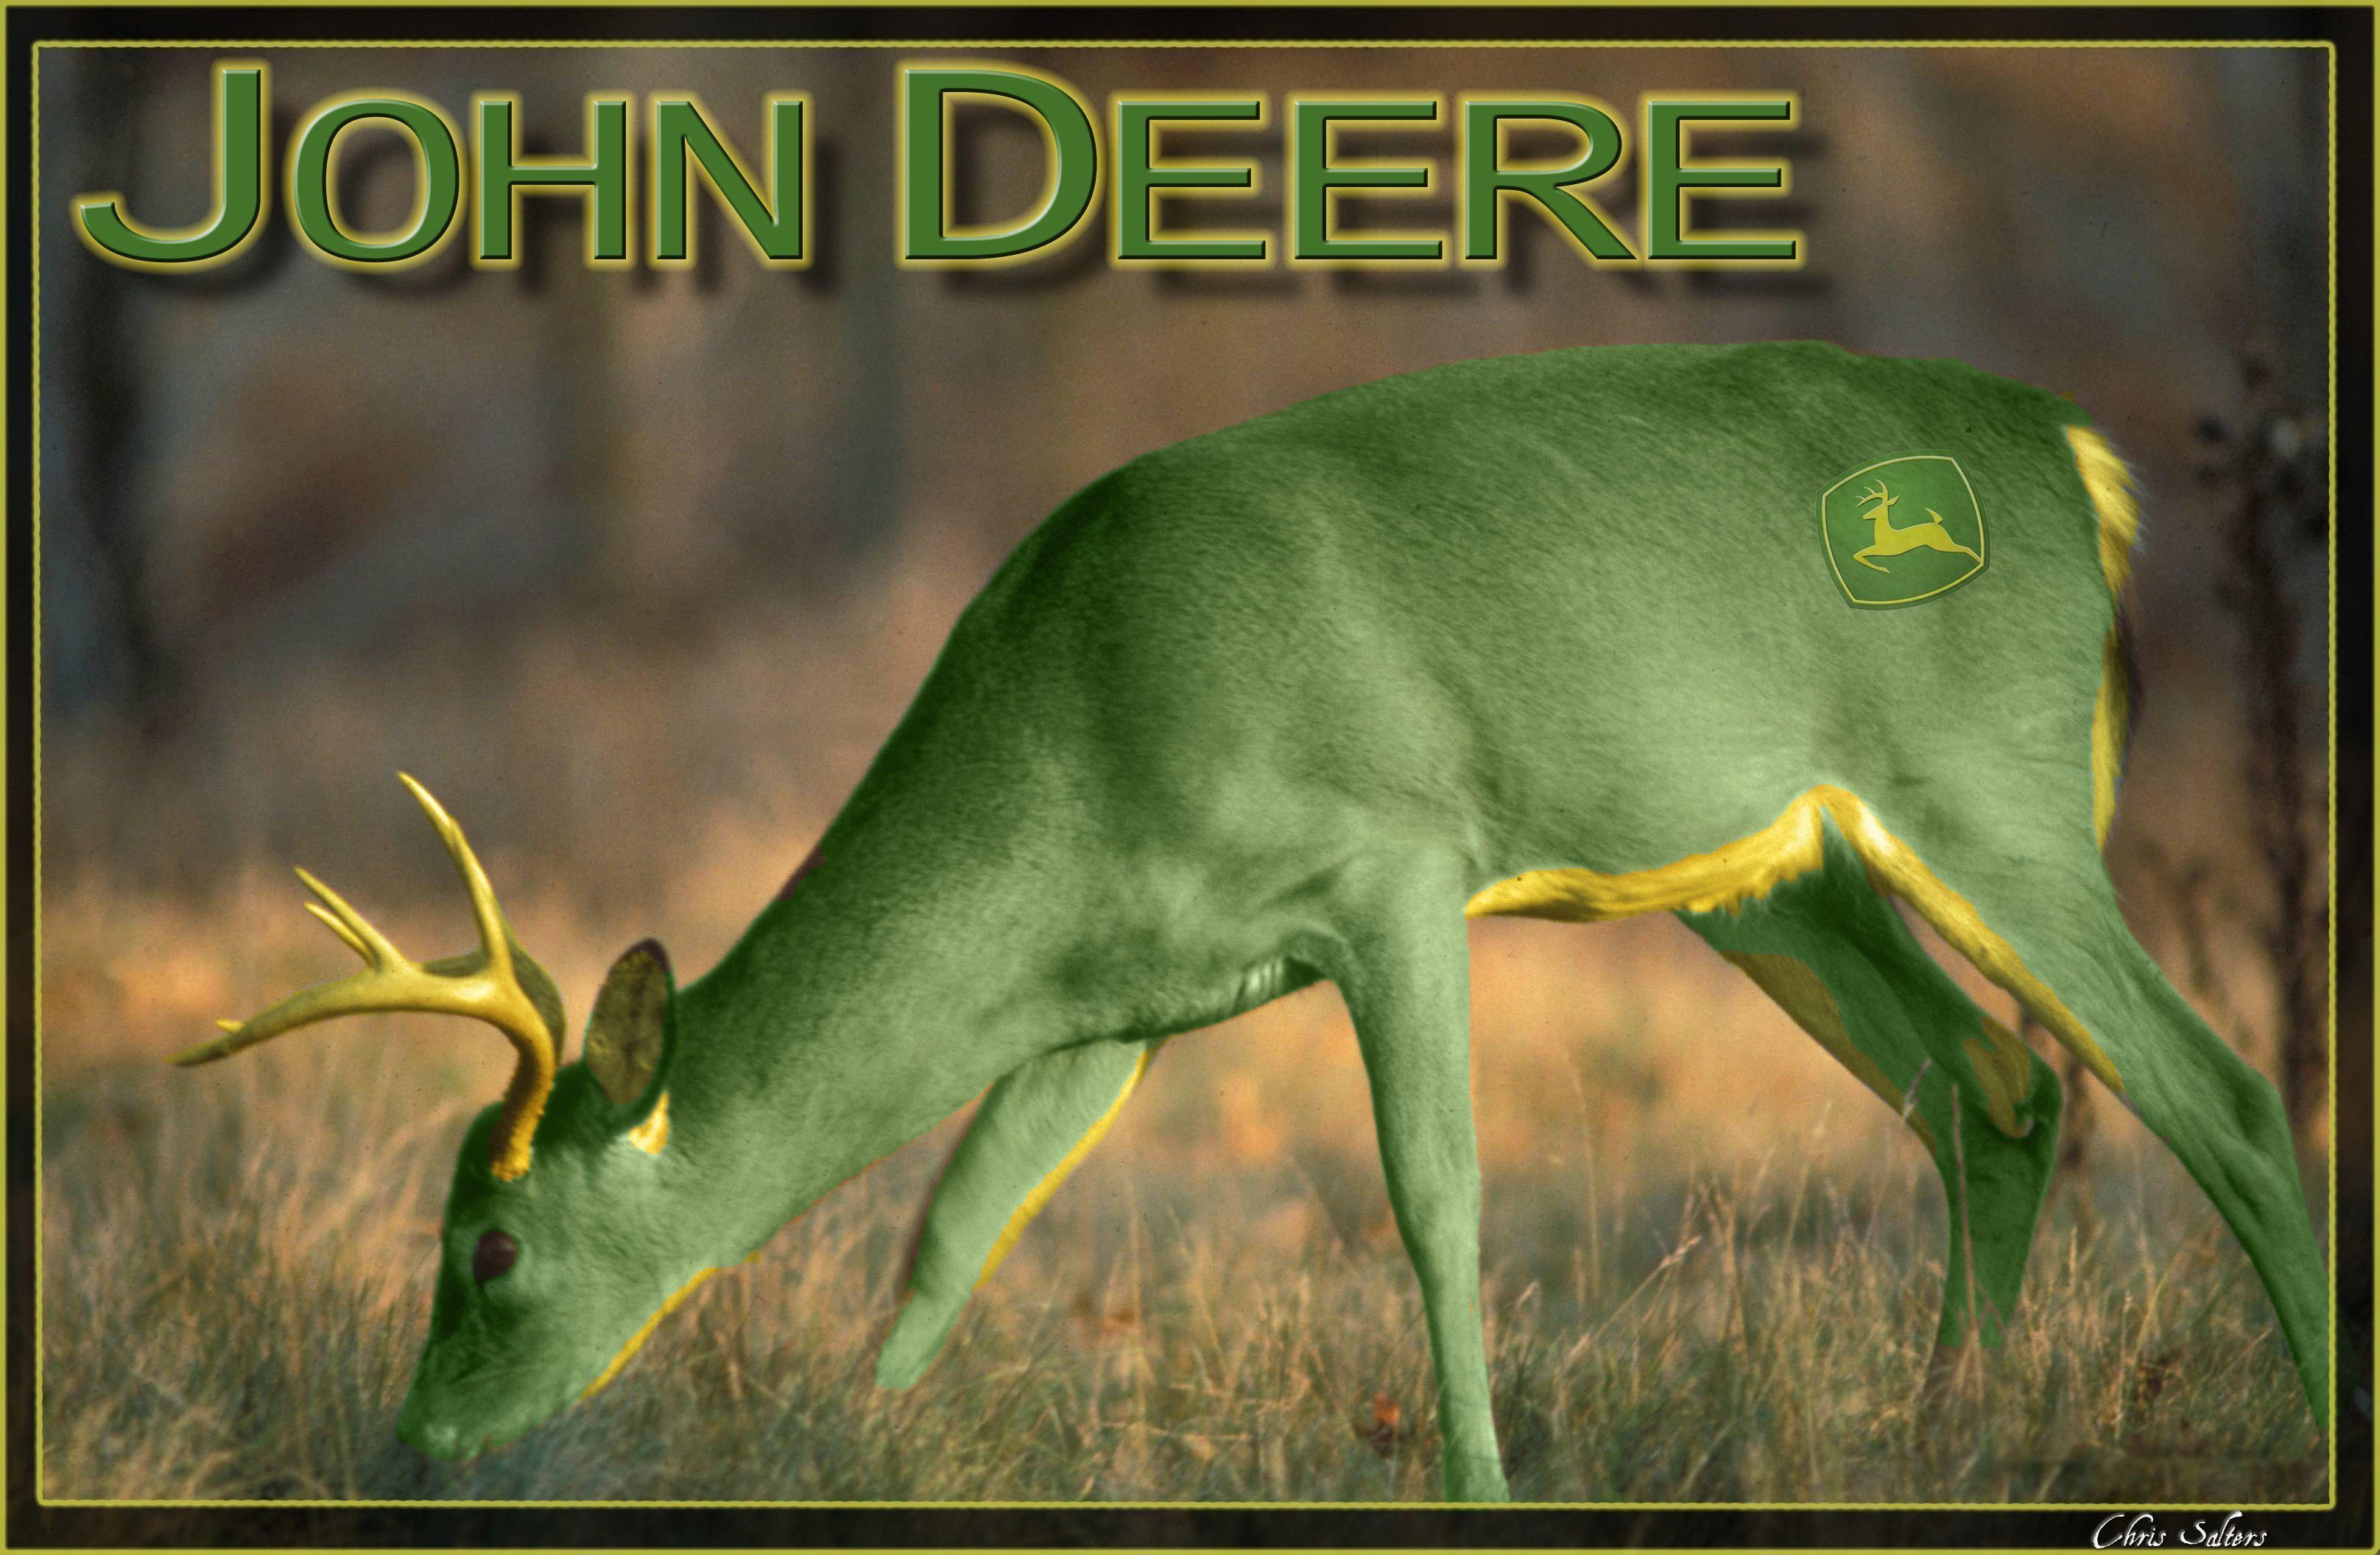 The Real John Deere by bh06there